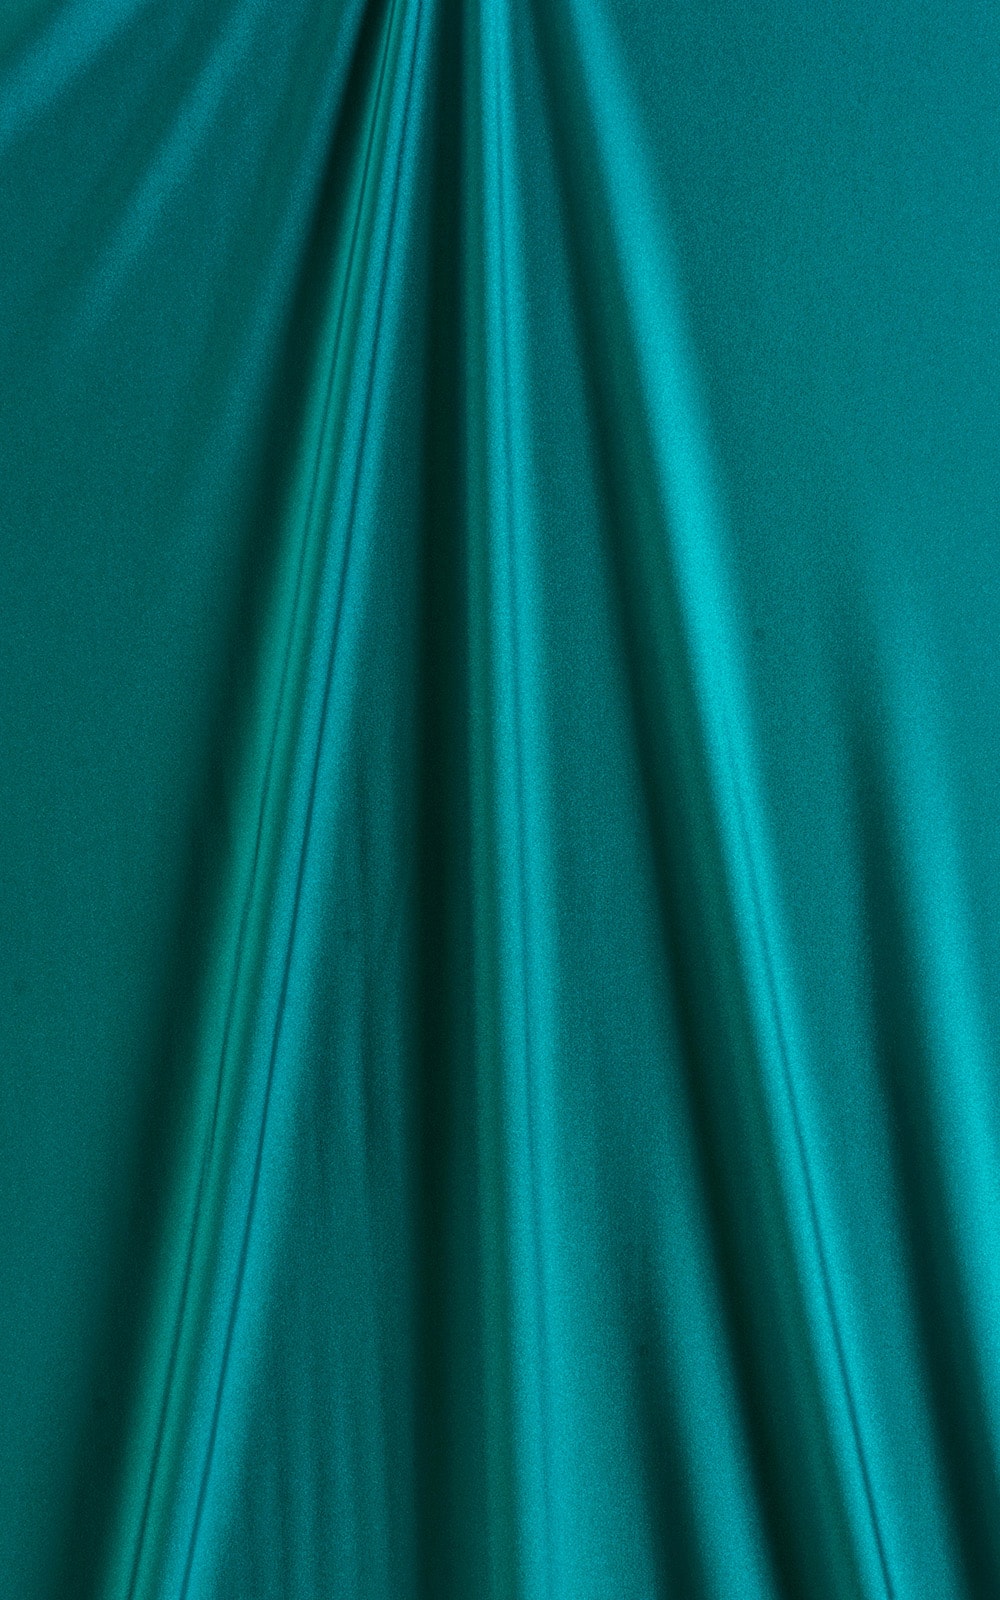 solid color deep jade blue green stretchy swimsuit fabric in nylon lycra